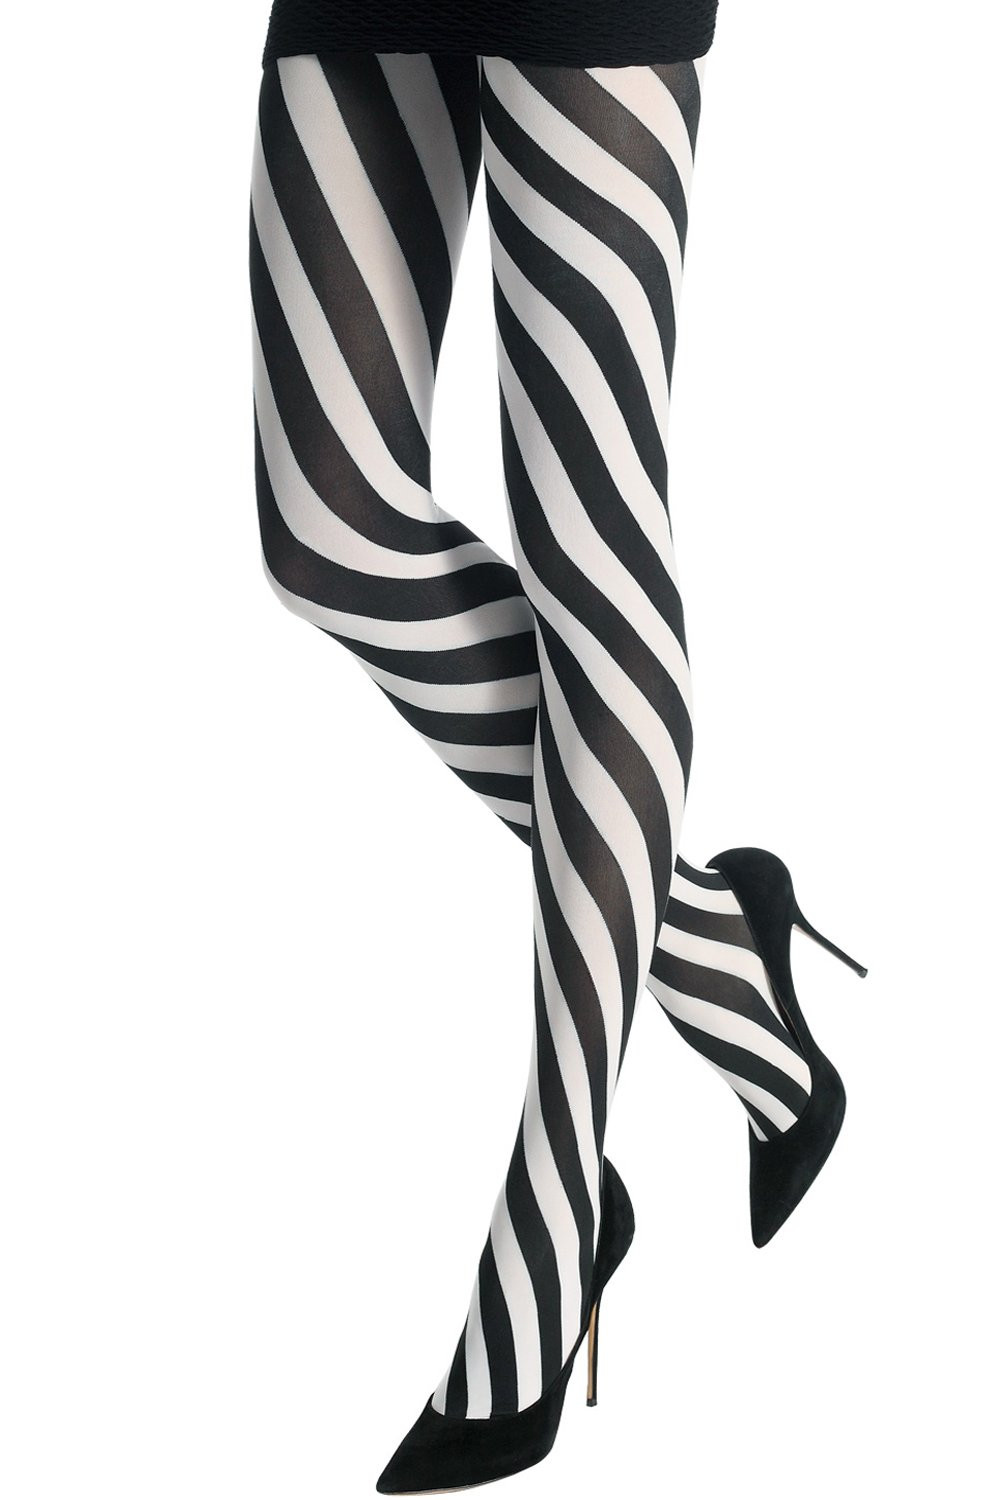 Two Toned Large Vertical Stripes Tights, Timeless Styles